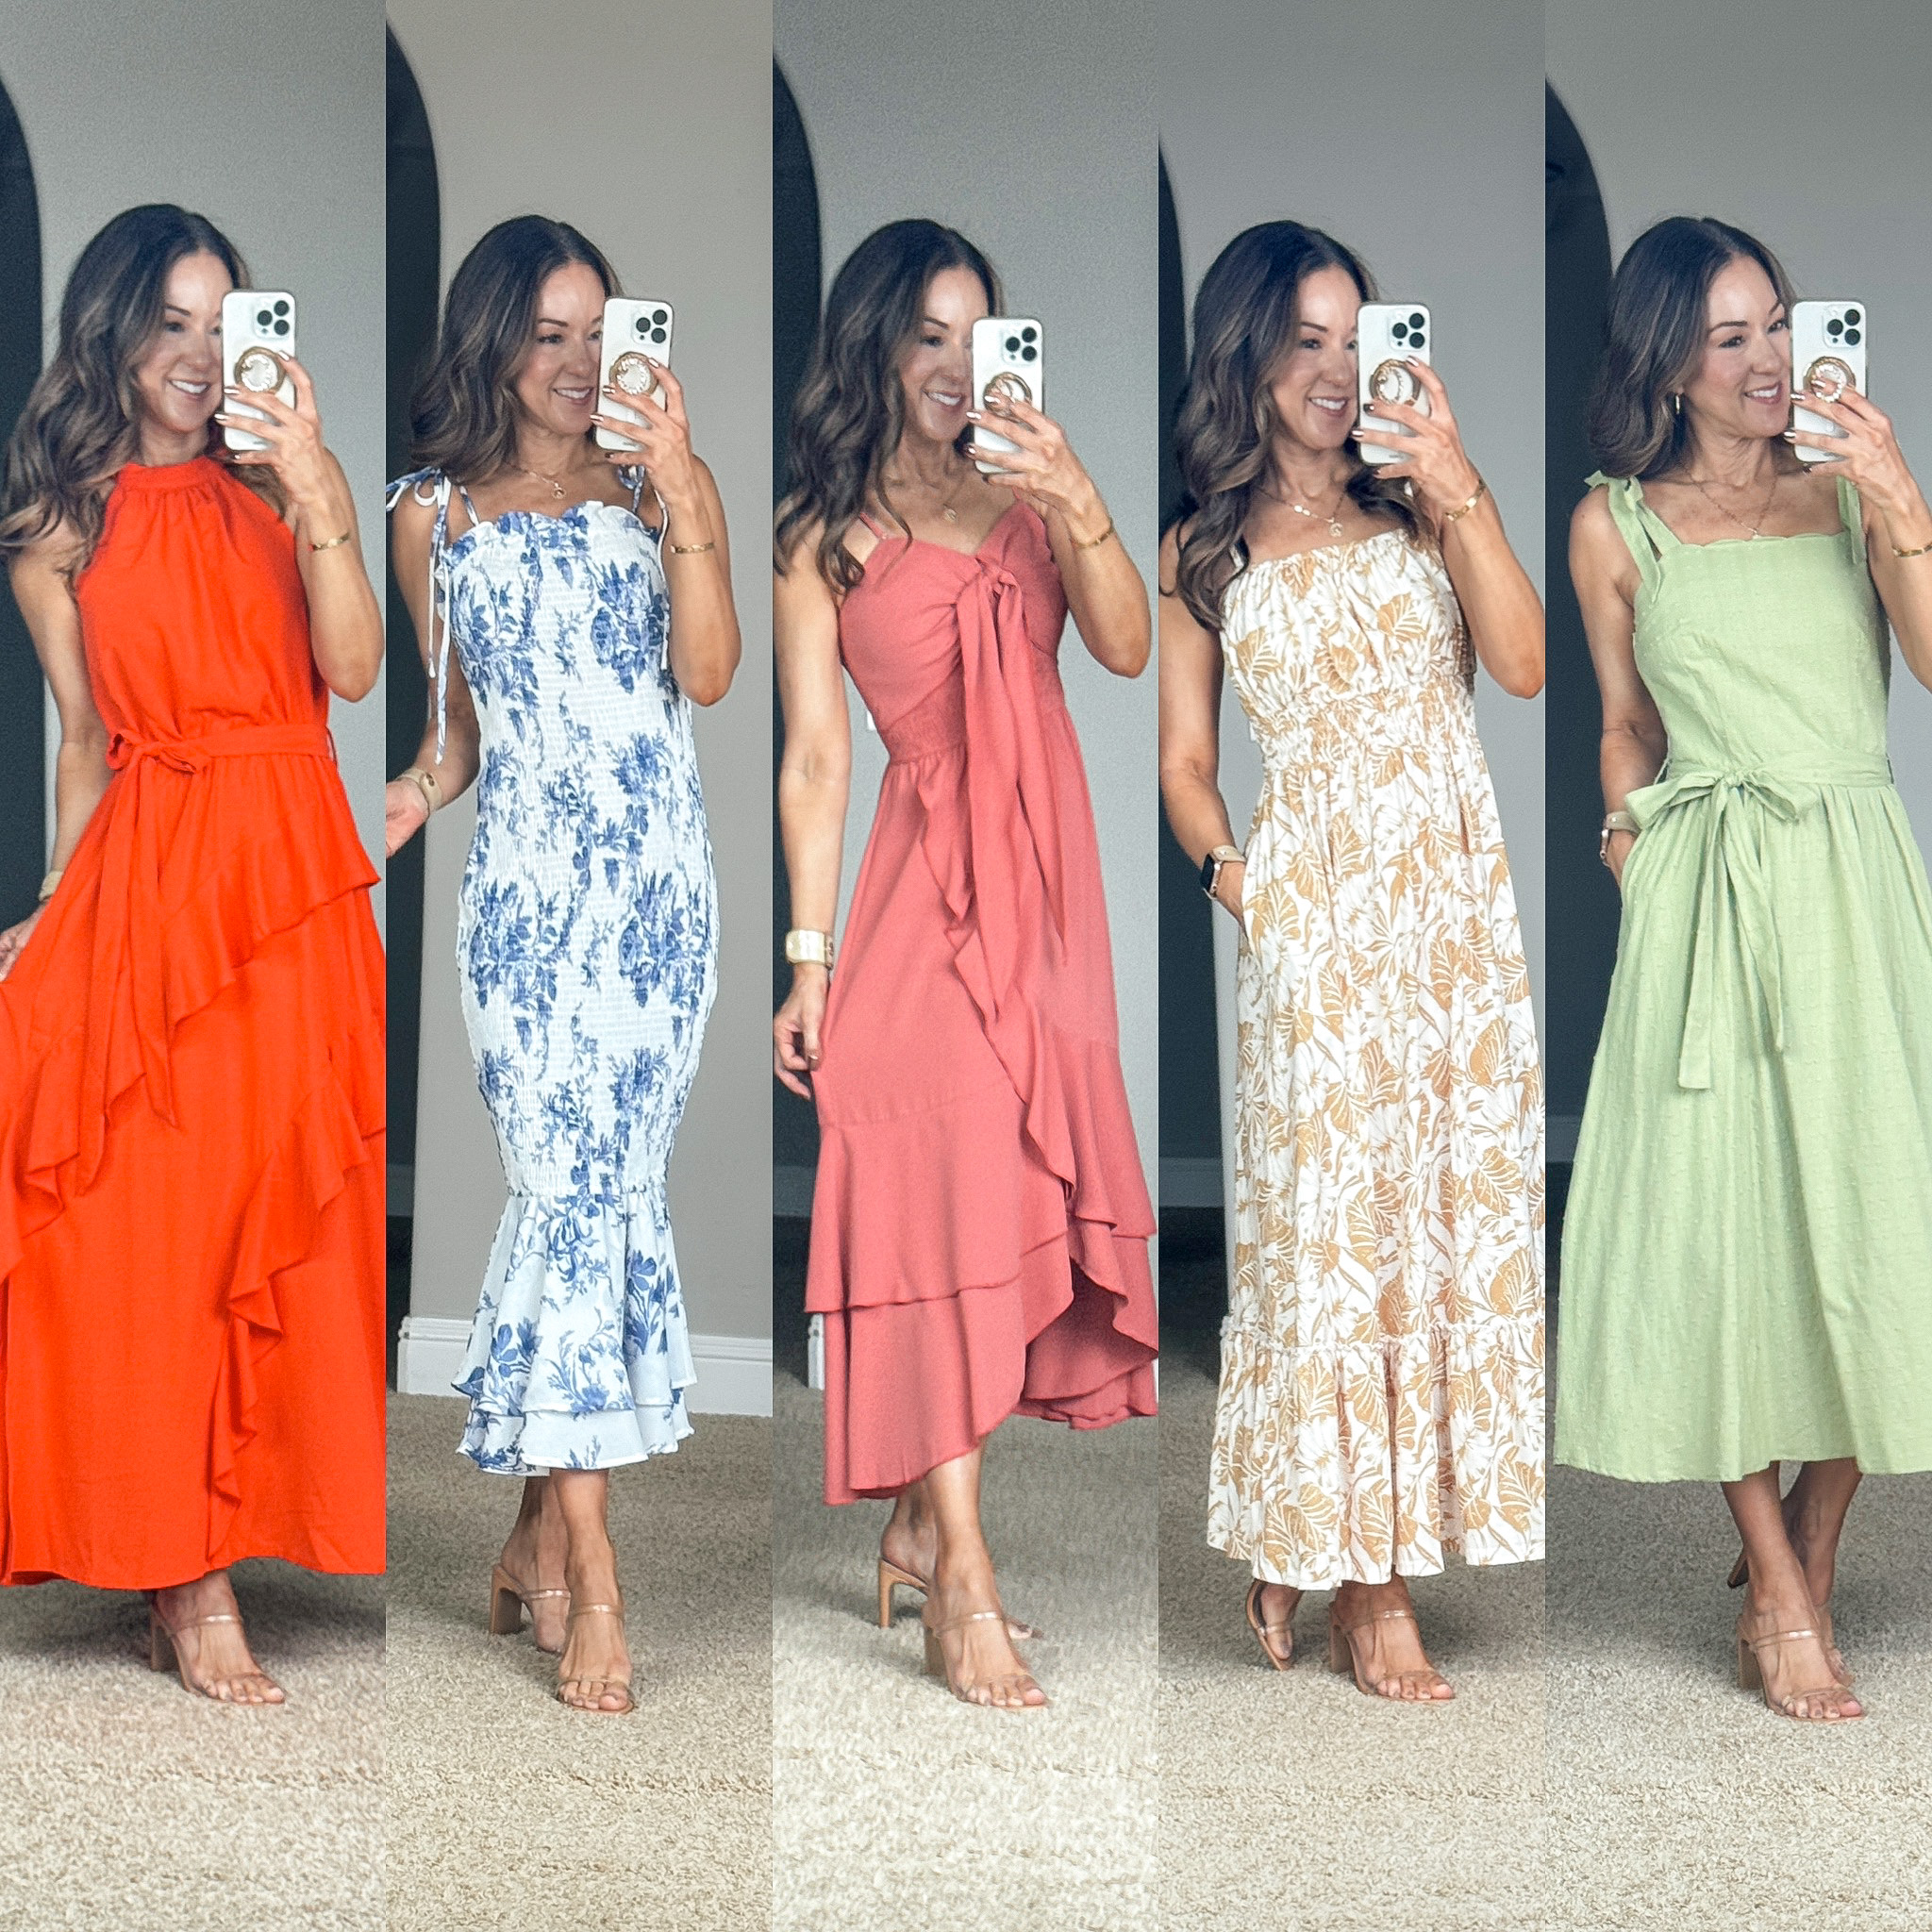 Spring into the season with these must-see dresses, accessories, and more | spring, spring fashion, spring dress, spring dresses, maxi dress, floral dress, heels, accessories, easter dress, wedding guest dress, special occasion dress